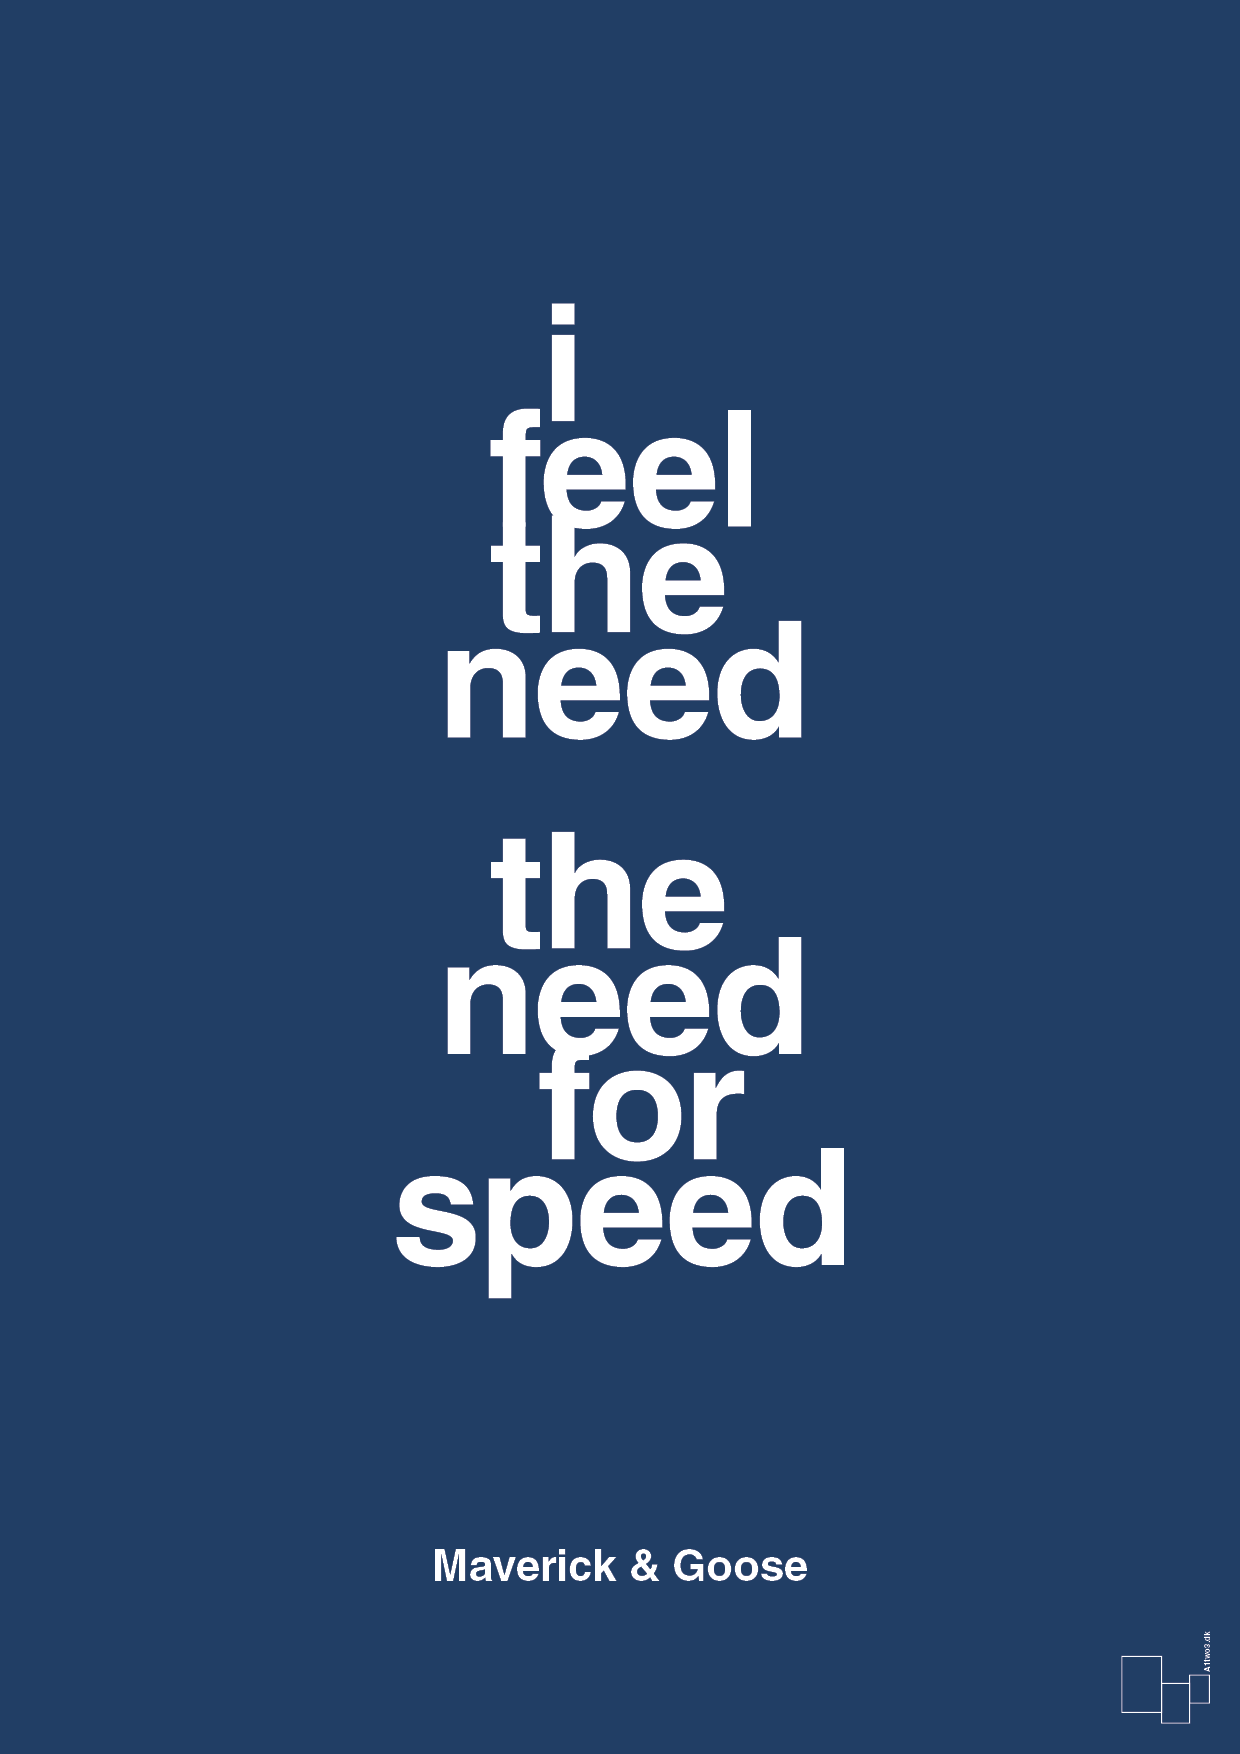 i feel the need the need for speed - Plakat med Citater i Lapis Blue